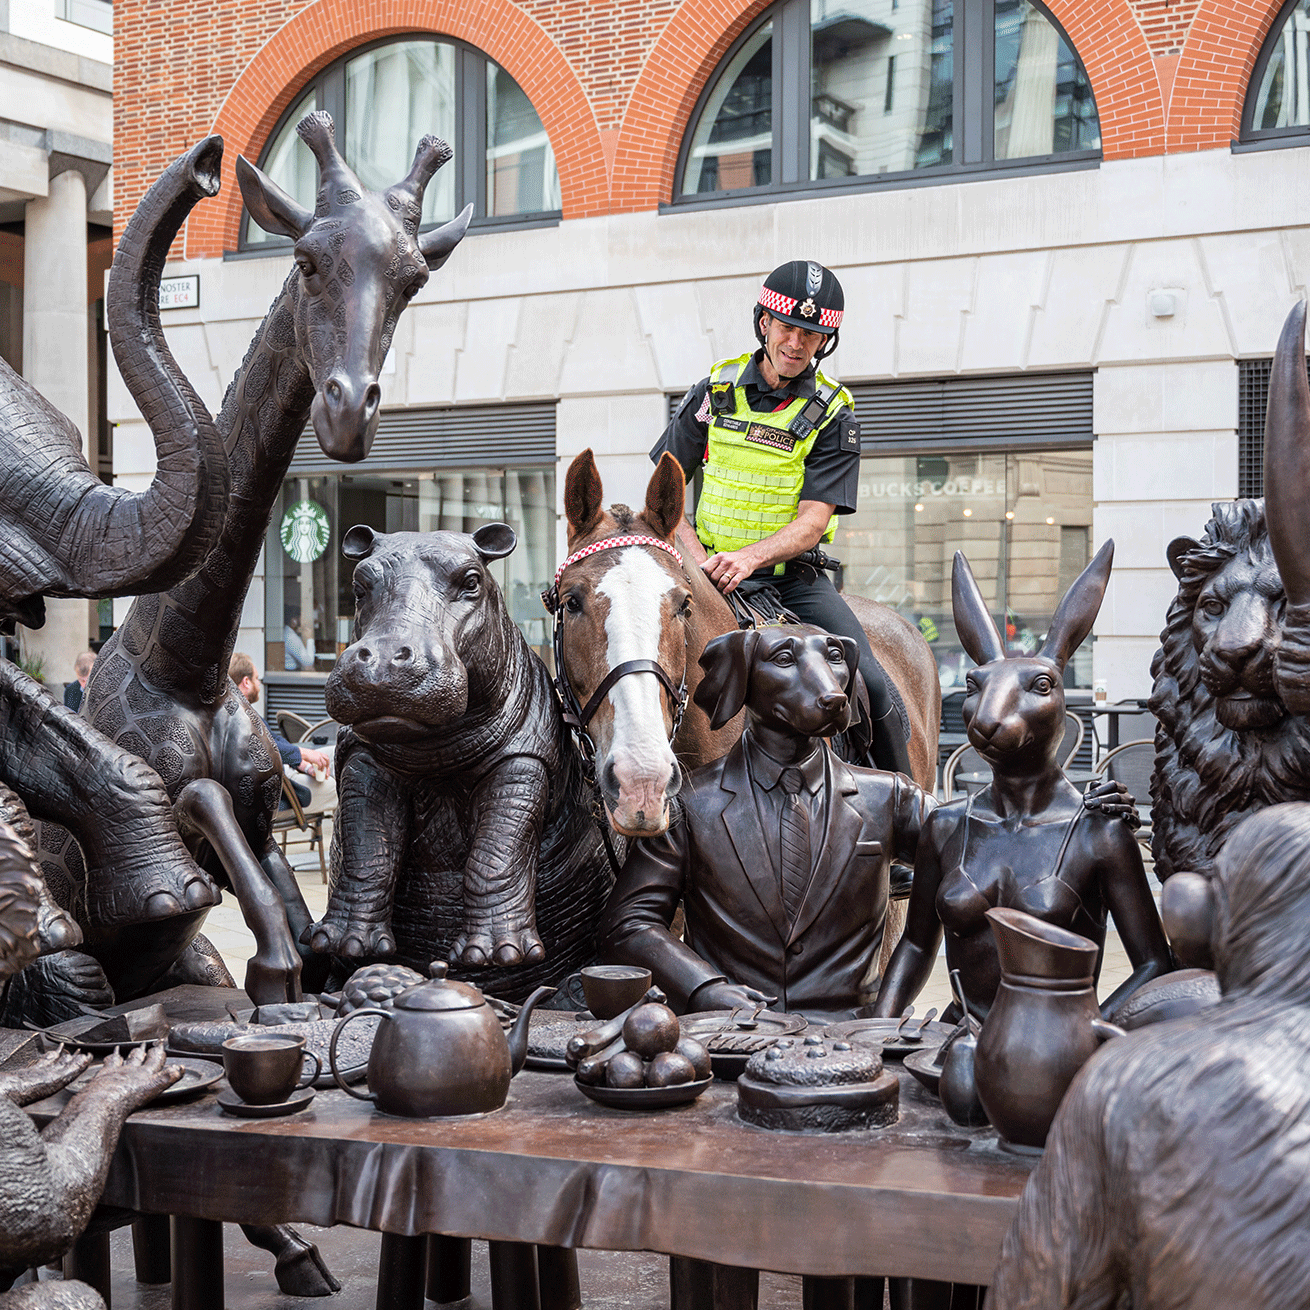 Where to find wild animal statues in London? (16 locations of